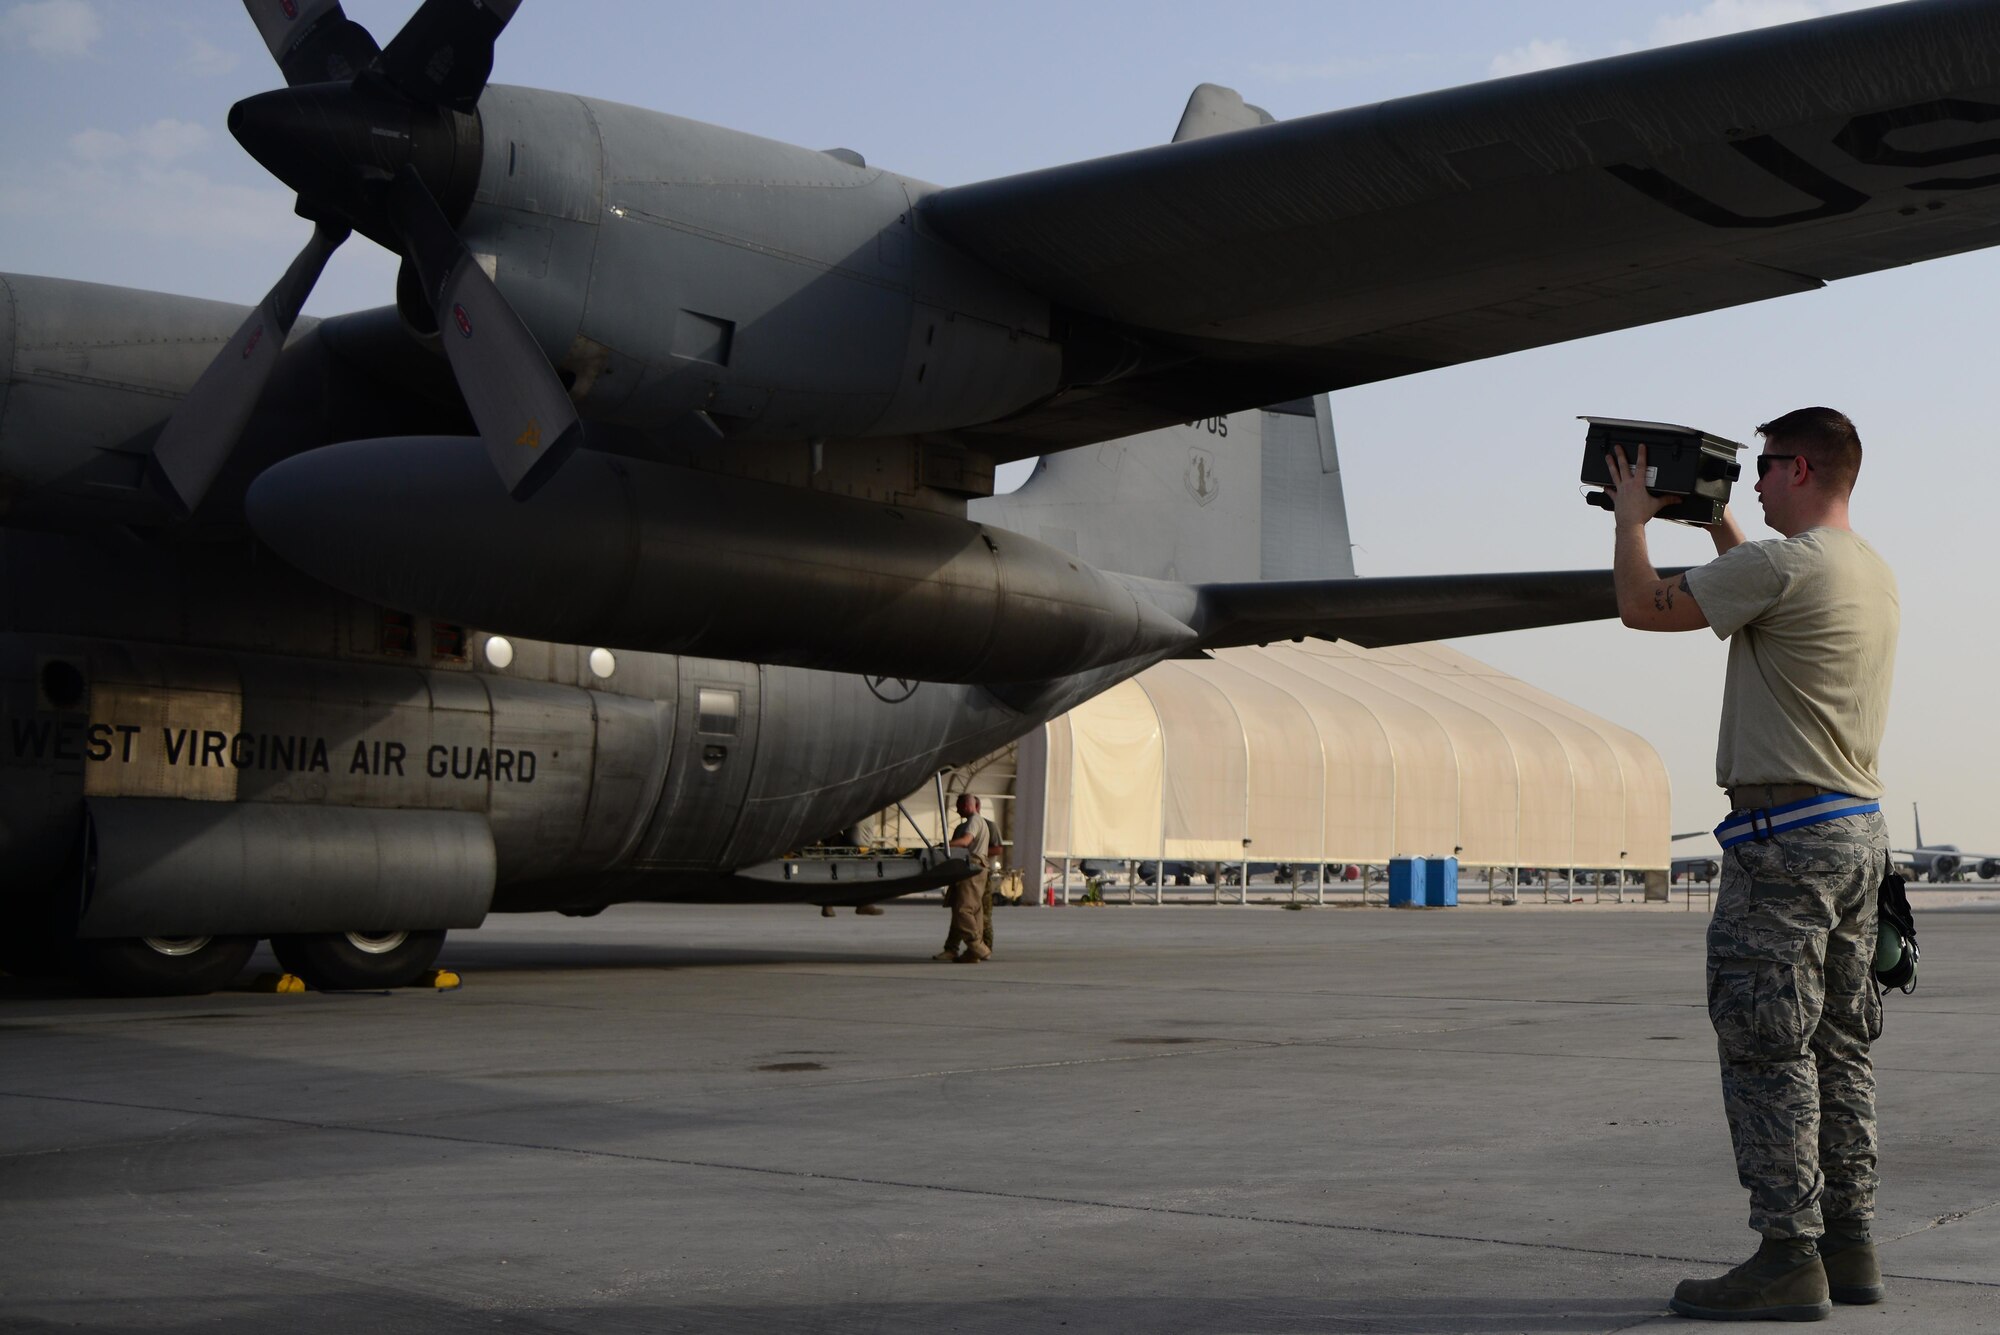 U.S. Air Force Senior Airman Isaac Fields, 746th Expeditionary Aircraft Maintenance Unit avionics, performs an Identification, Friend-or-Foe check on a C-130 Hercules, Feb. 18, 2015, at Al Udeid Air Base, Qatar. IFF is an identification system designed for command and control that enables military and national interrogation systems to identify aircraft, vehicles or forces as friendly and to determine their bearing and range from the interrogator. (U.S. Air Force photo by Senior Airman Kia Atkins)